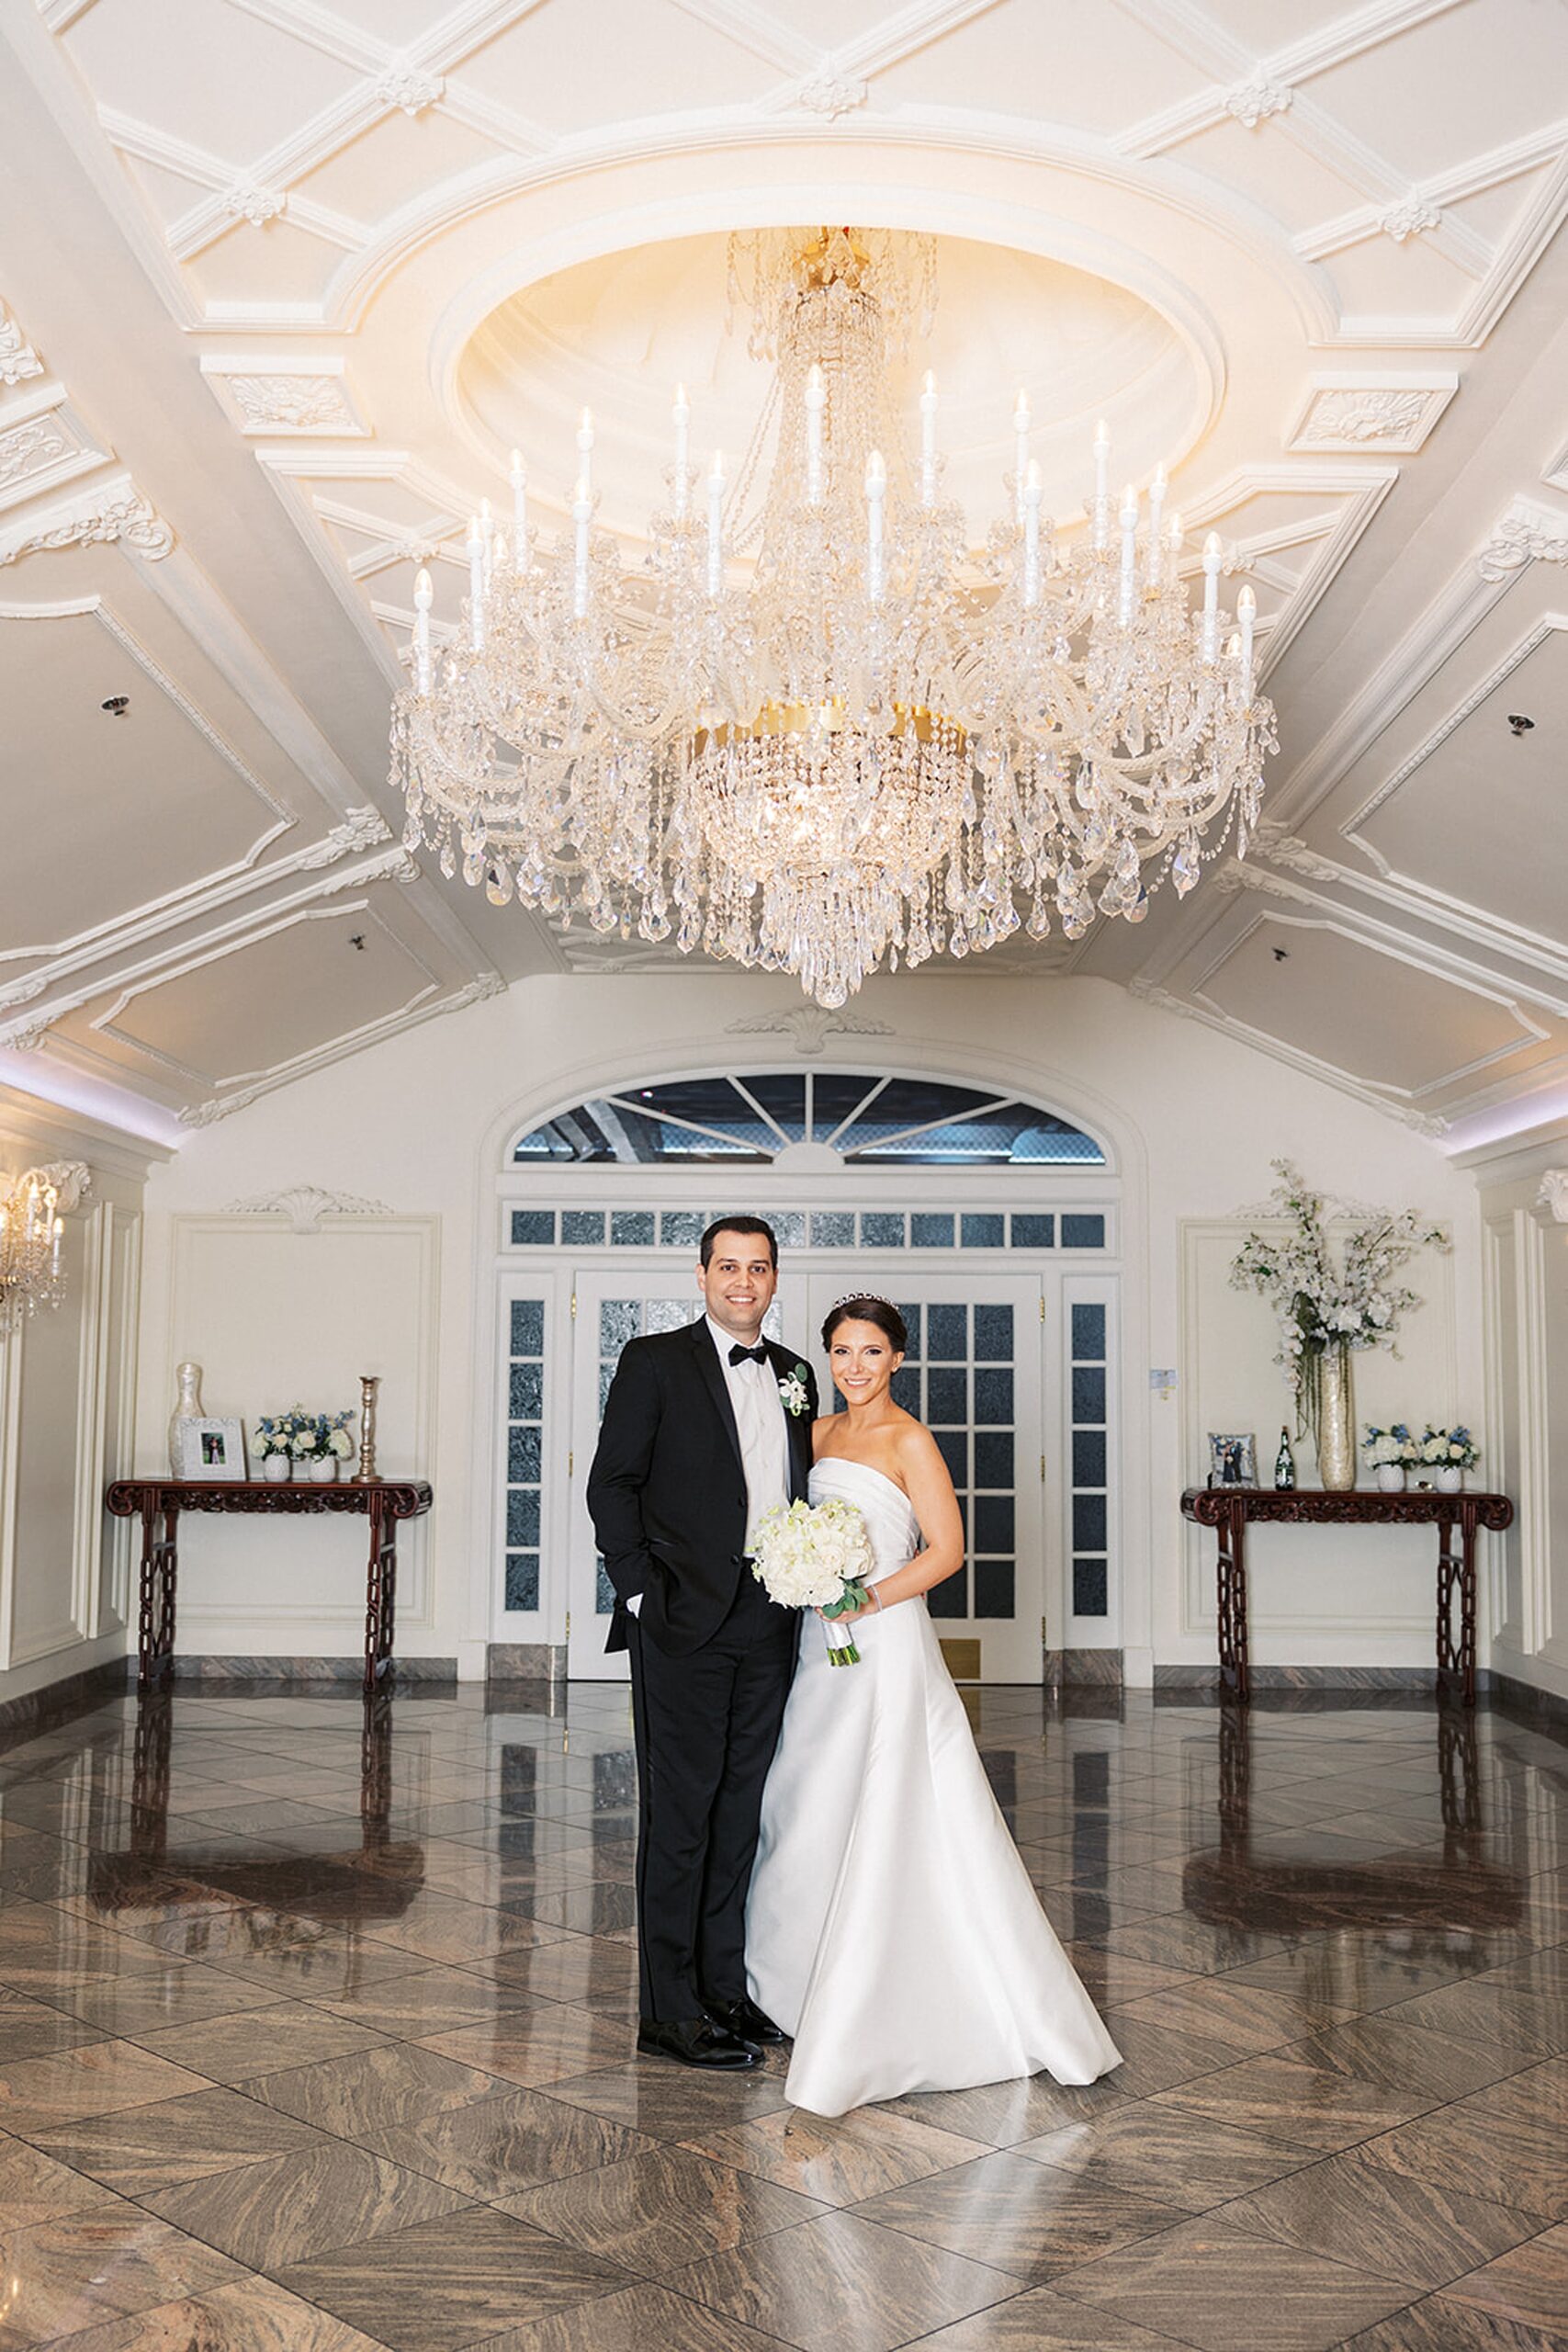 Newlyweds stand together under a large crystal chandelier at the entrance to their wedding reception